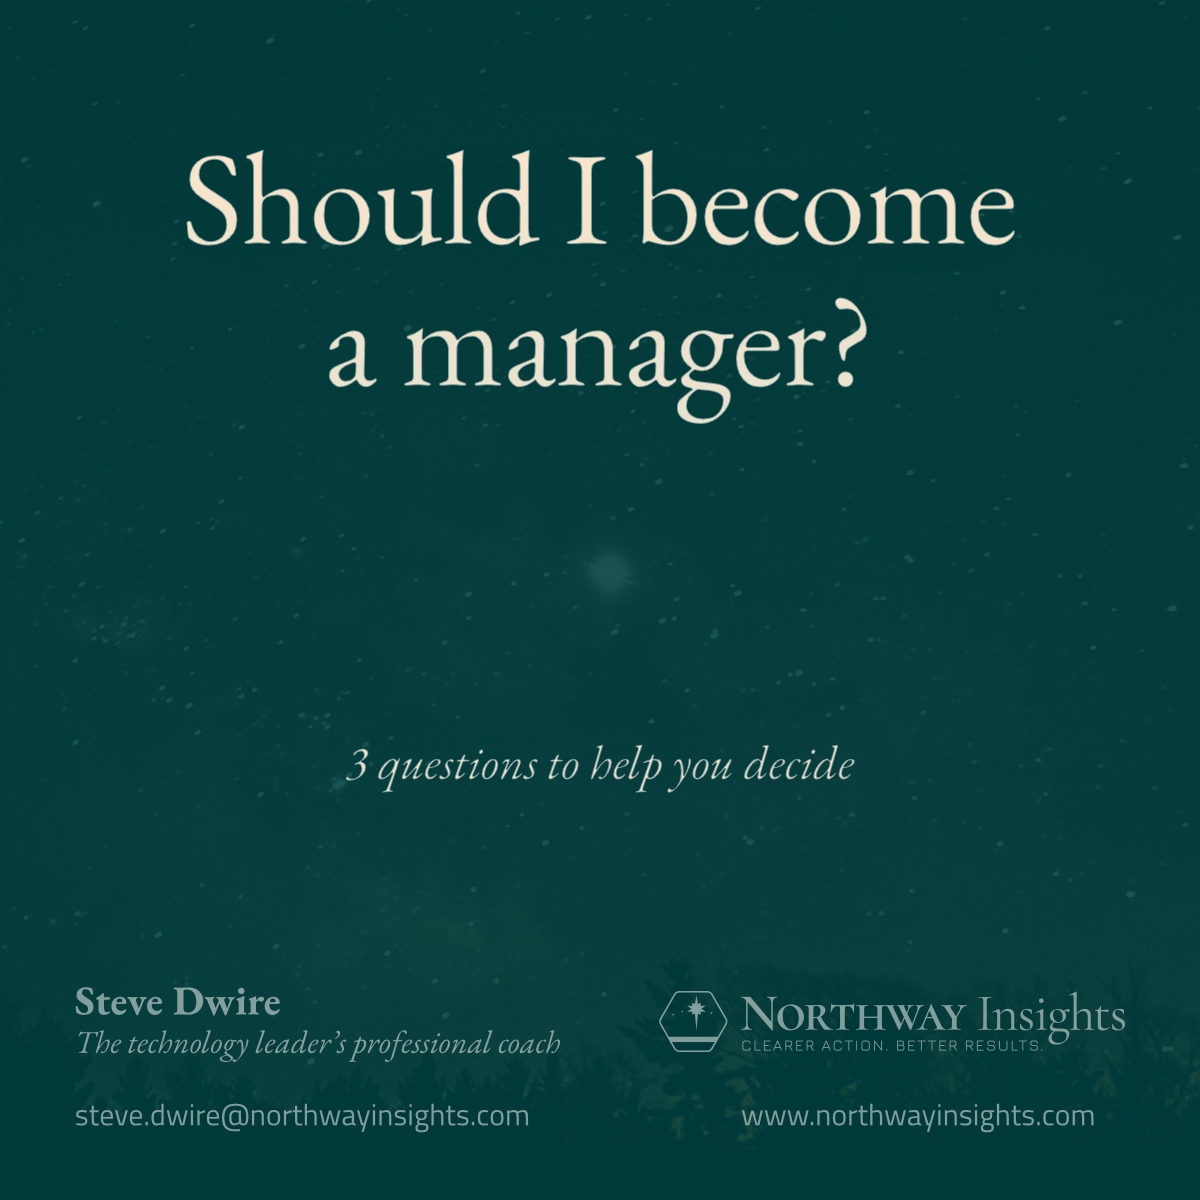 Should I become a manager? (3 questions to help you decide)